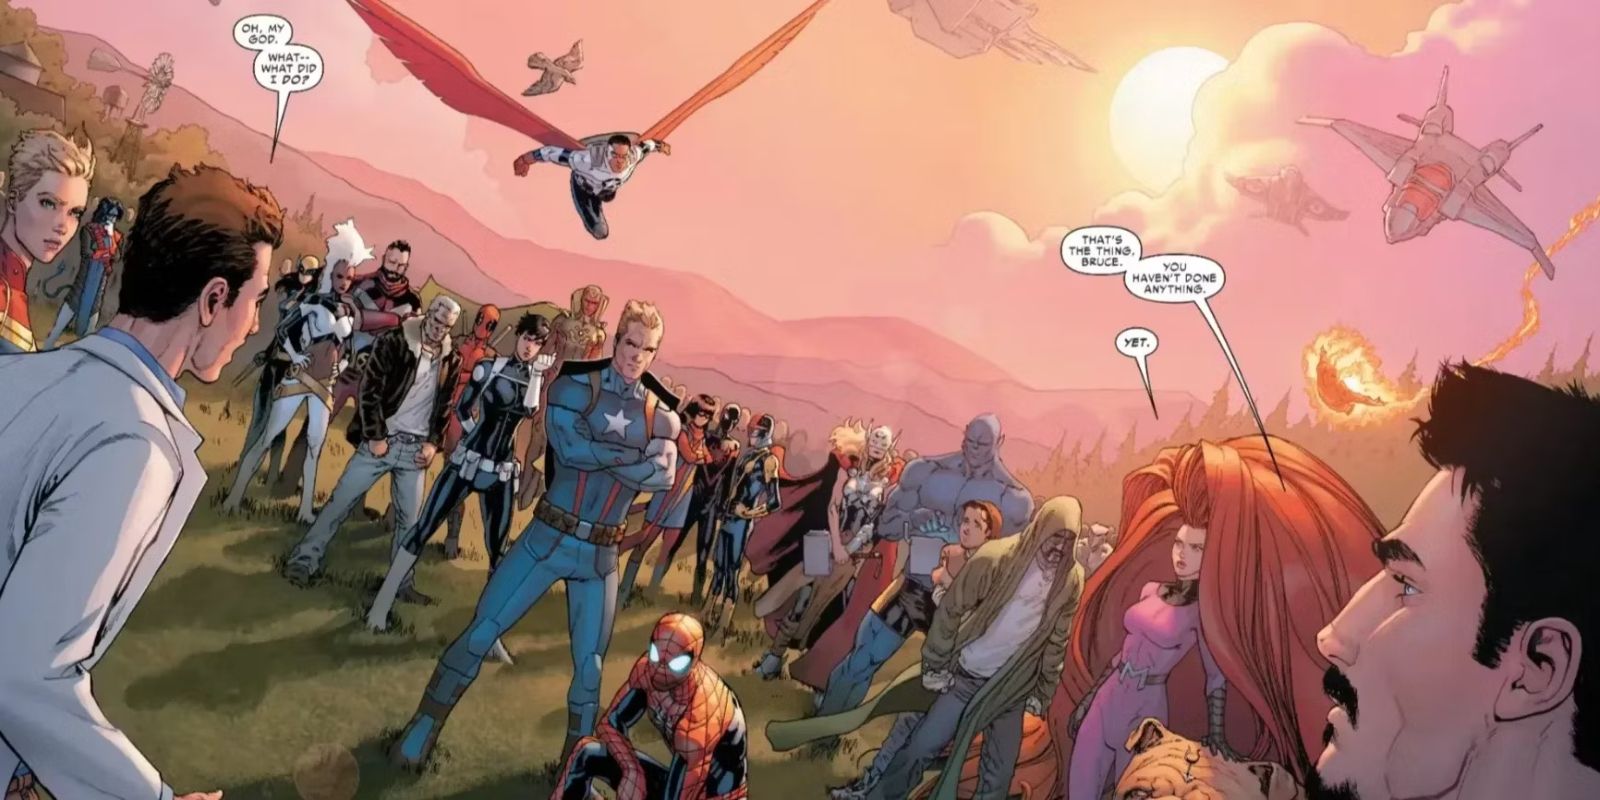 A group of heroes in Civil War 2